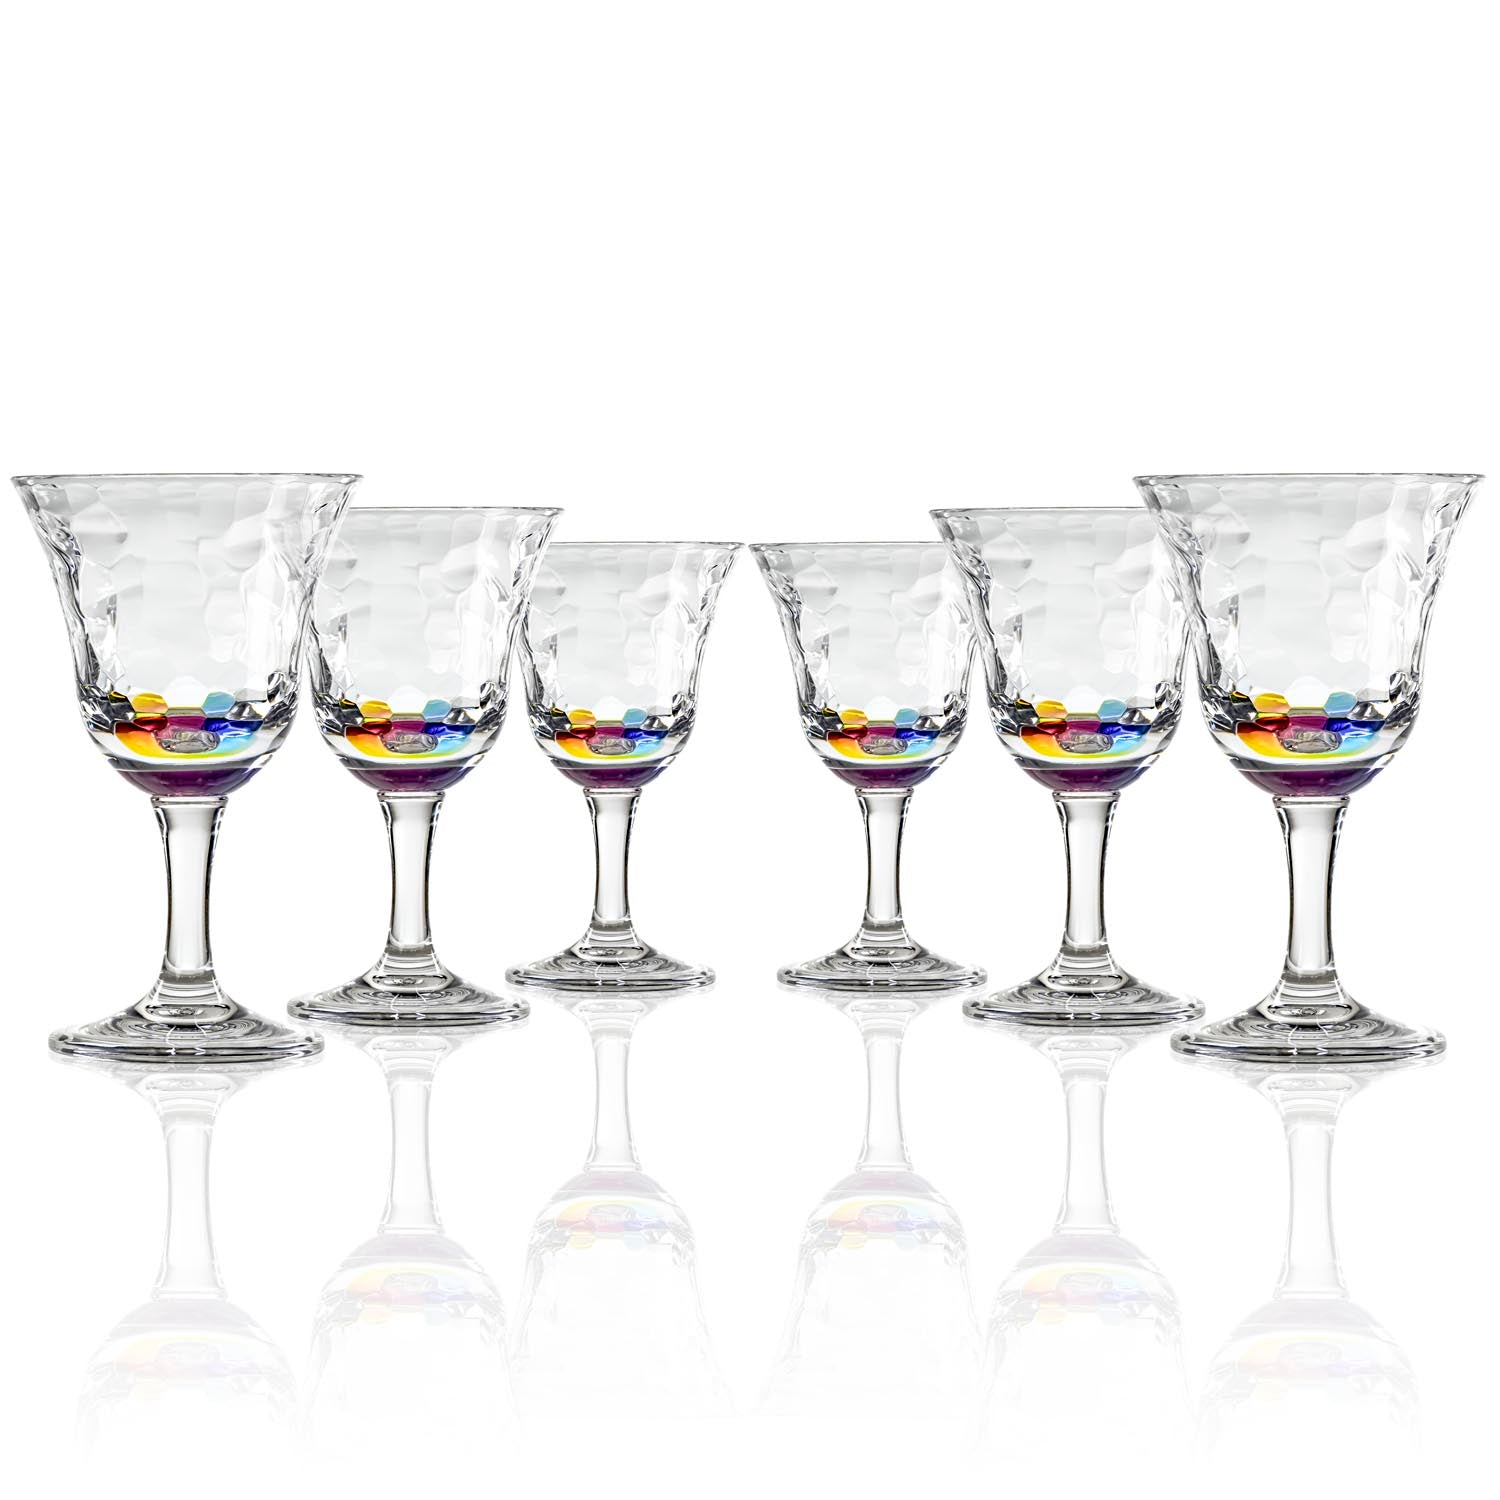 Merritt Designs Cascade Rainbow 12oz Acrylic Wine Stemware set of 6 front view with a white background